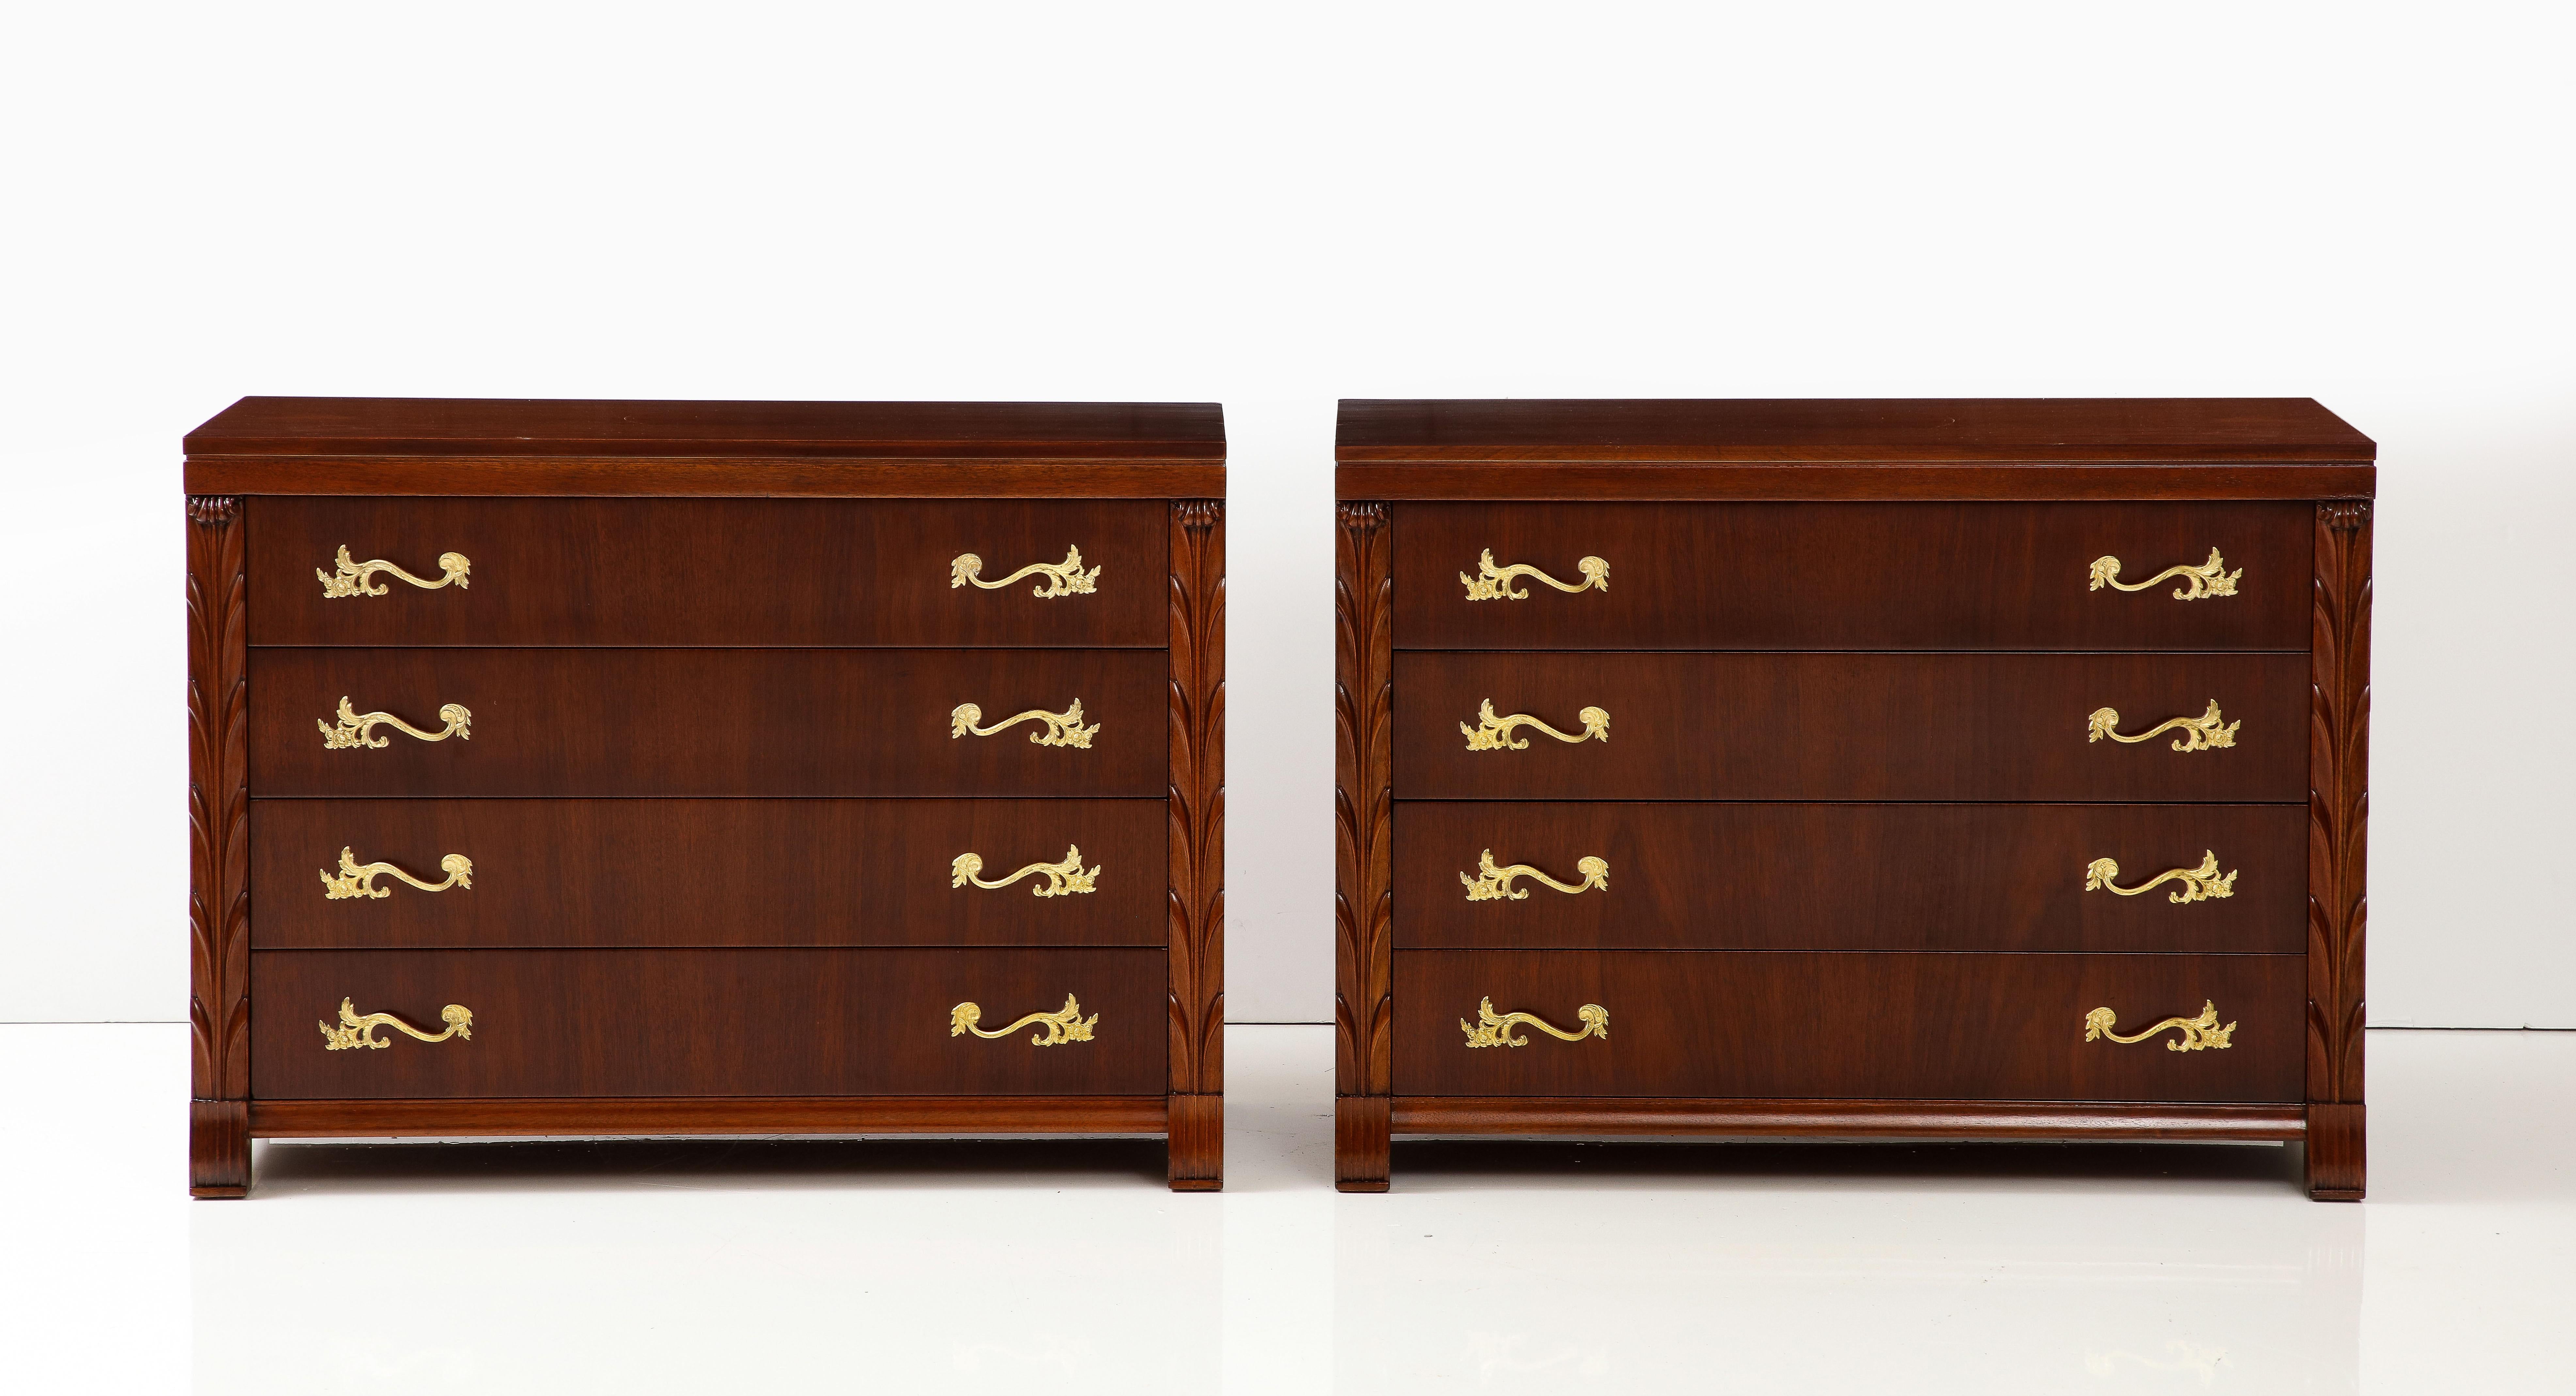 Amazing pair of large 1940s John Stuart Inc. 4 Drawer mahogany commodes with gilt brass handles, fully restored with minor wear and patina due to age and use.